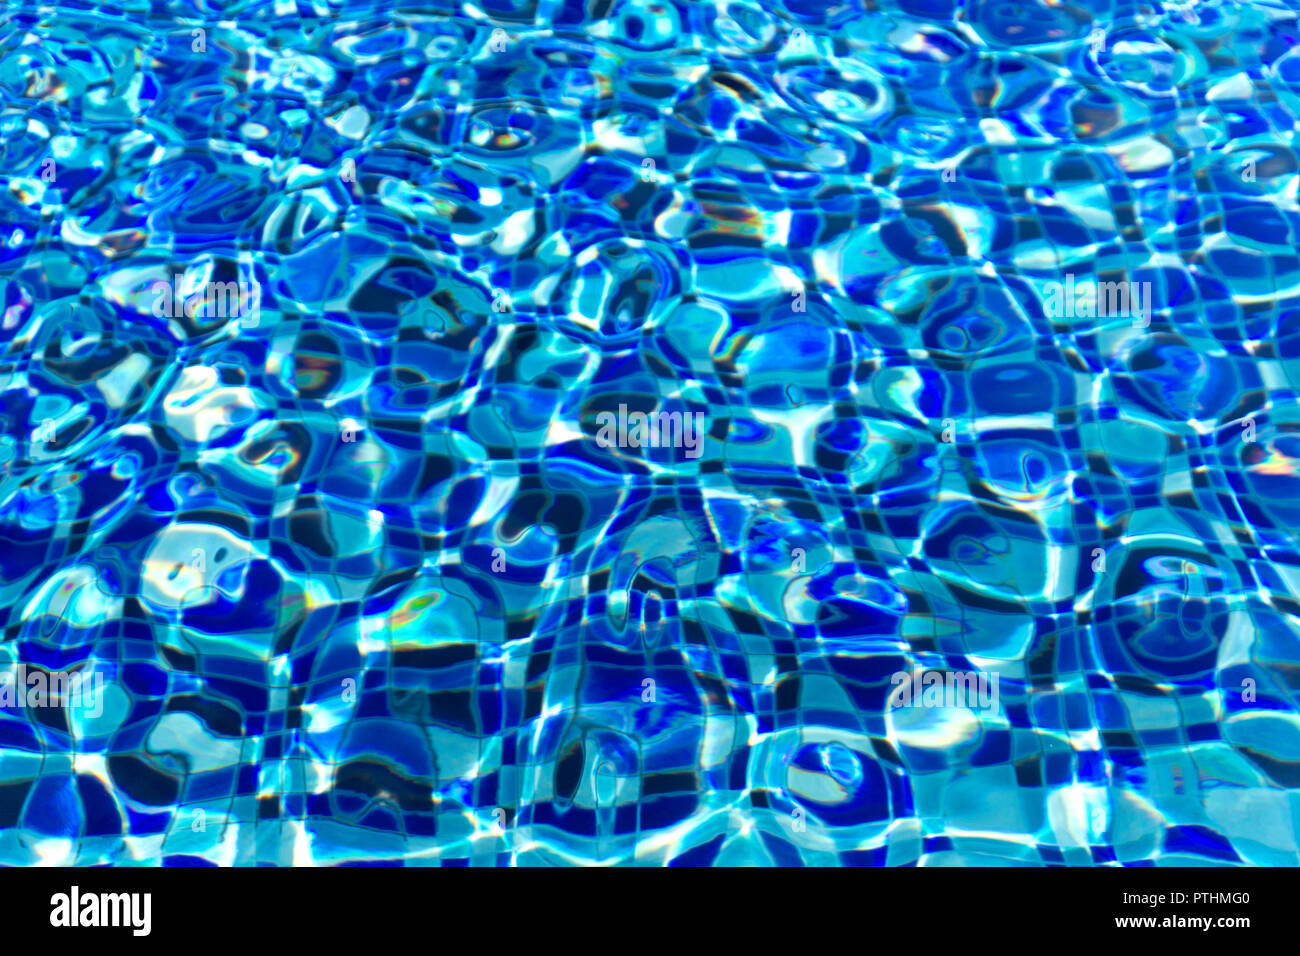 Ripple and flow with waves swimming pool bottom background. Stock Photo